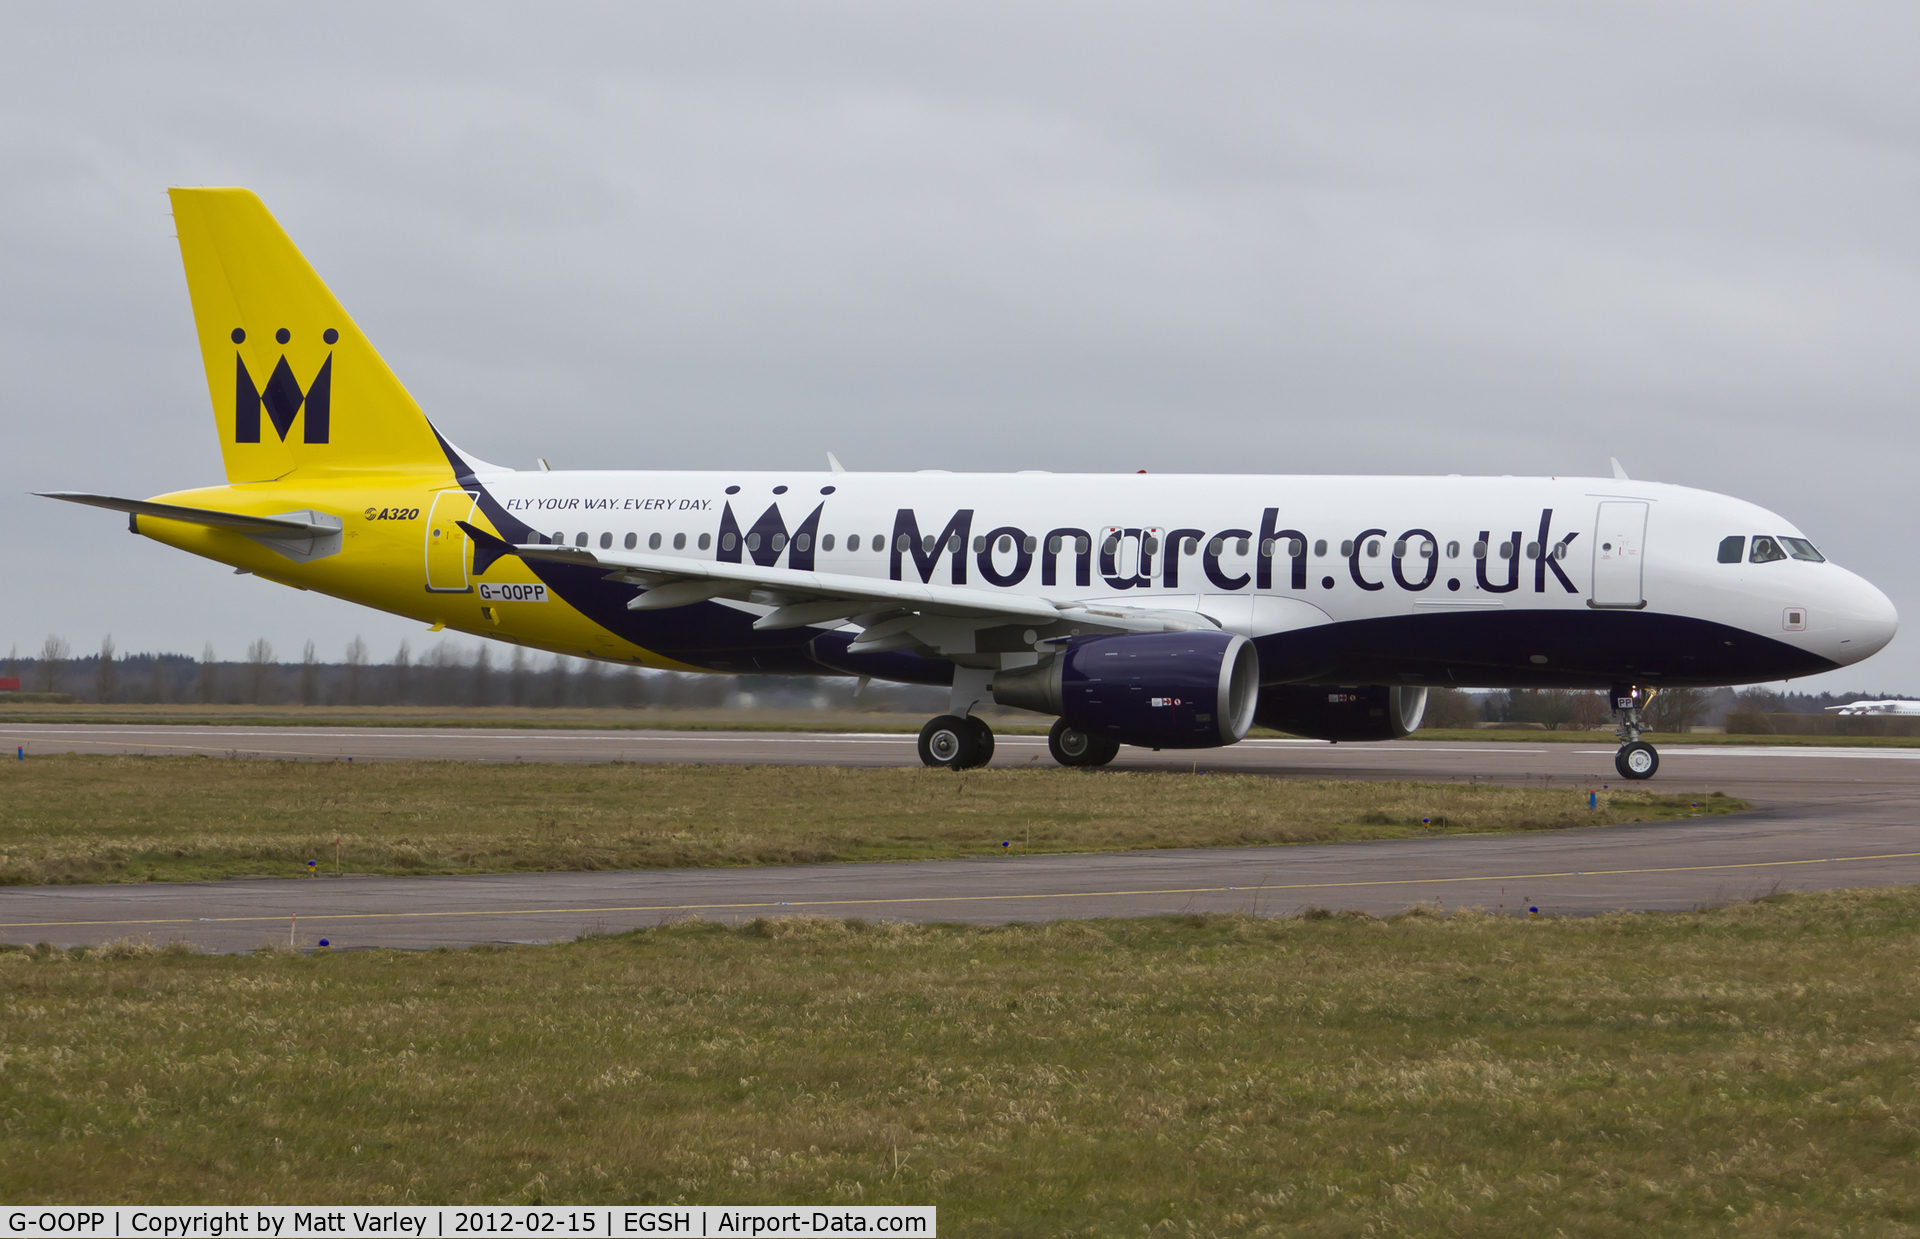 G-OOPP, 2001 Airbus A320-214 C/N 1571, Departing EGSH after spray into new Monarch C/S by Air Livery (To become G-OZBW).